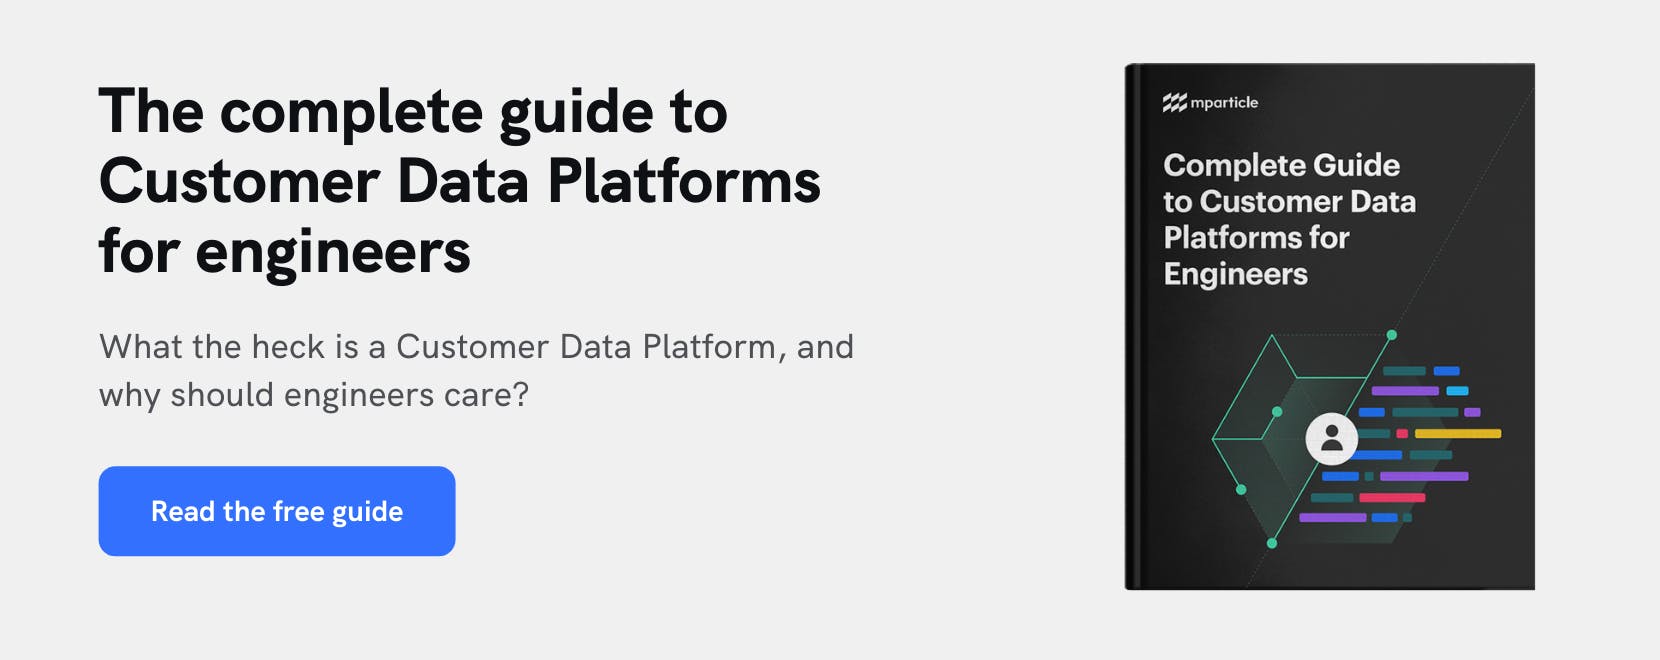 complete-guide-to-customer-data-platforms-for-engineers